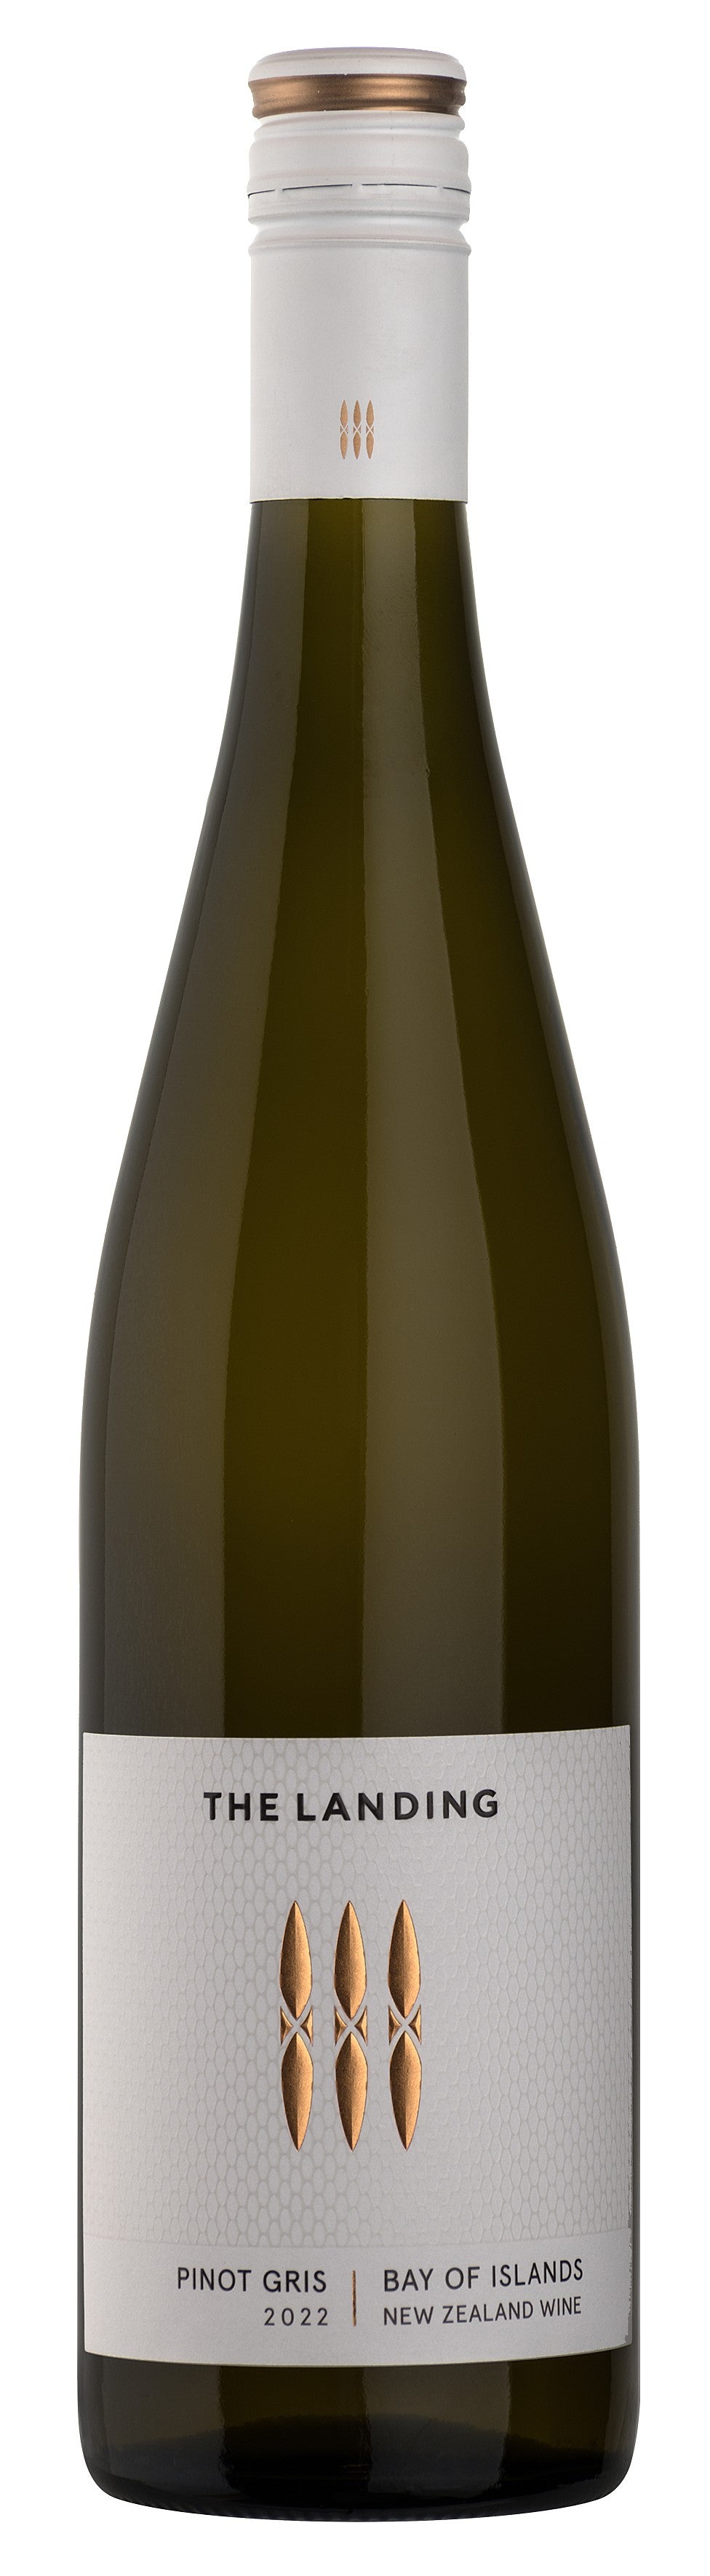 The Landing, Bay of Islands Pinot Gris 2023